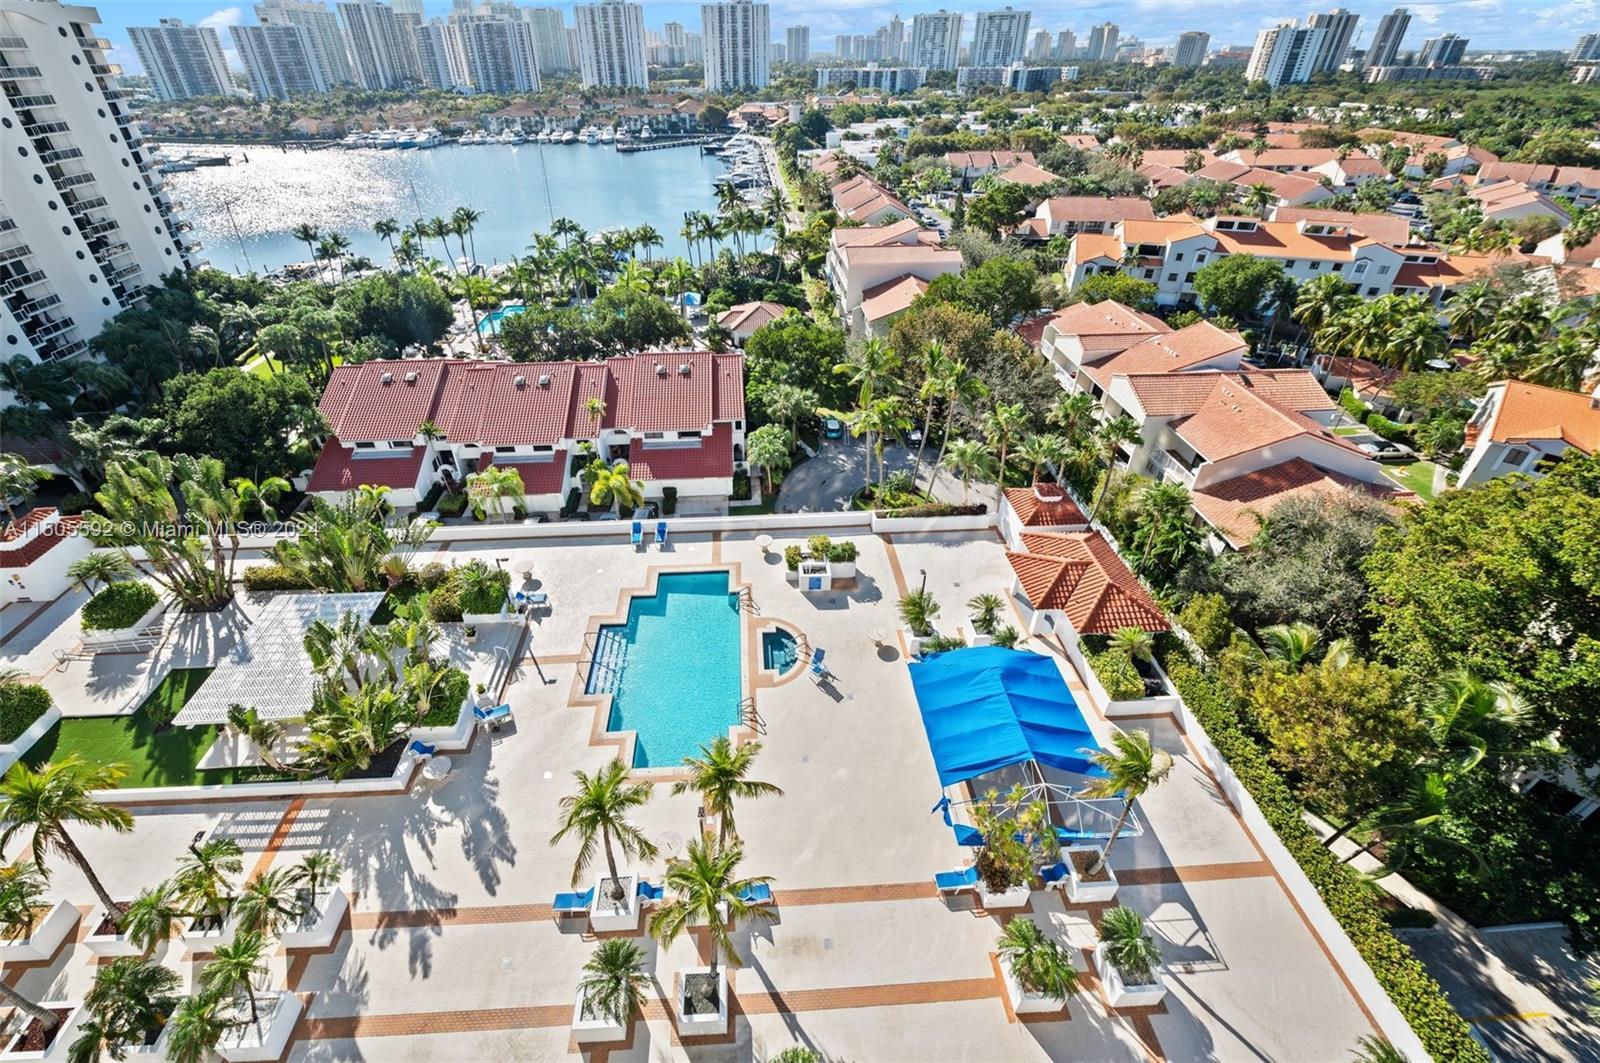 SPECTACULAR VIEW & NEWLY RENOVATED: 2/2 Condo overlooking the Waterways Marina and pools. Split plan